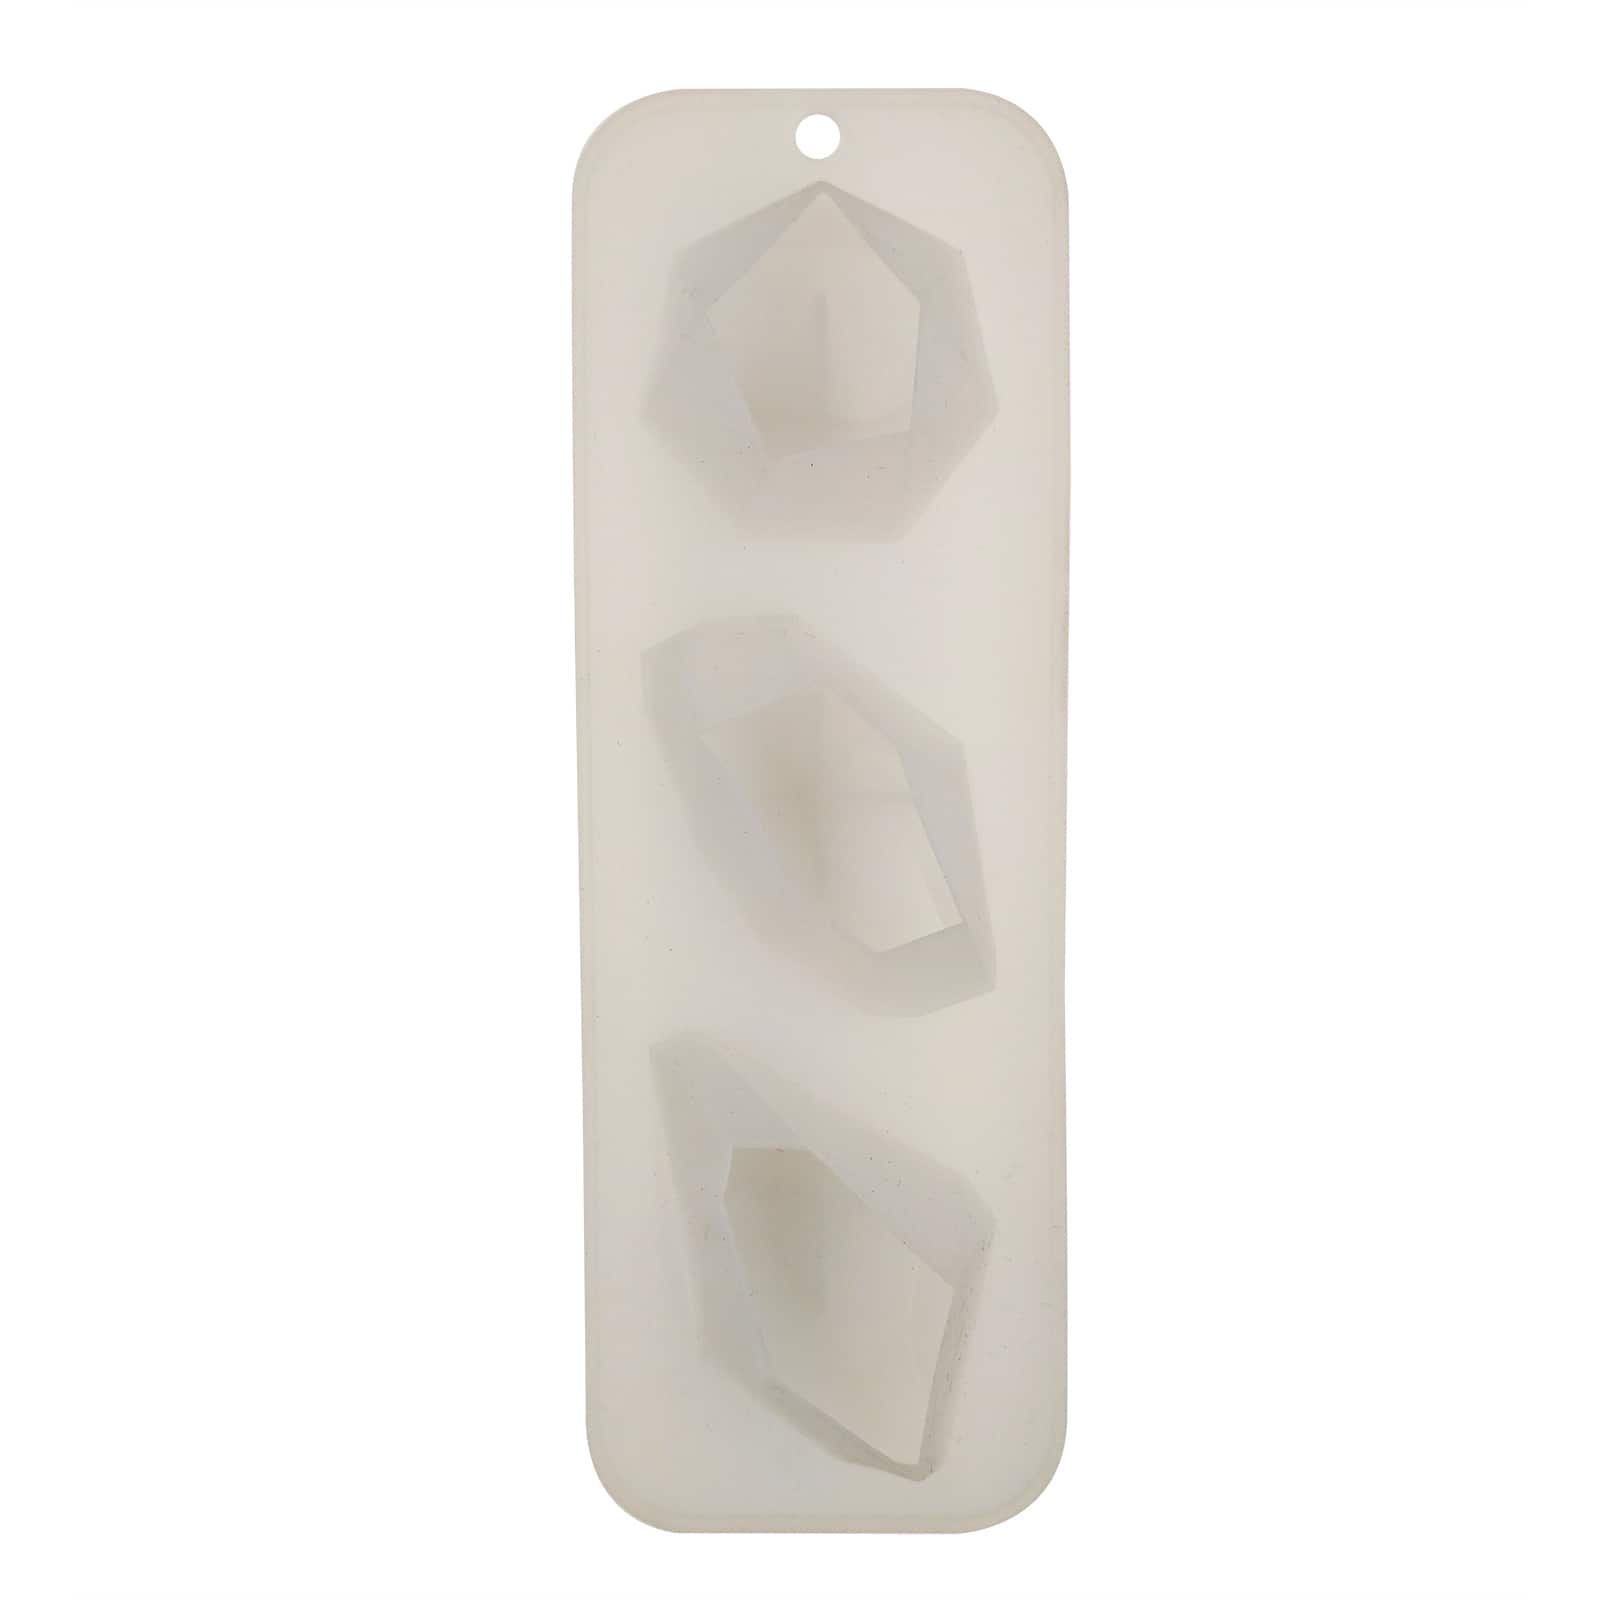 Plastic Pillar Candle Mold by Make Market®